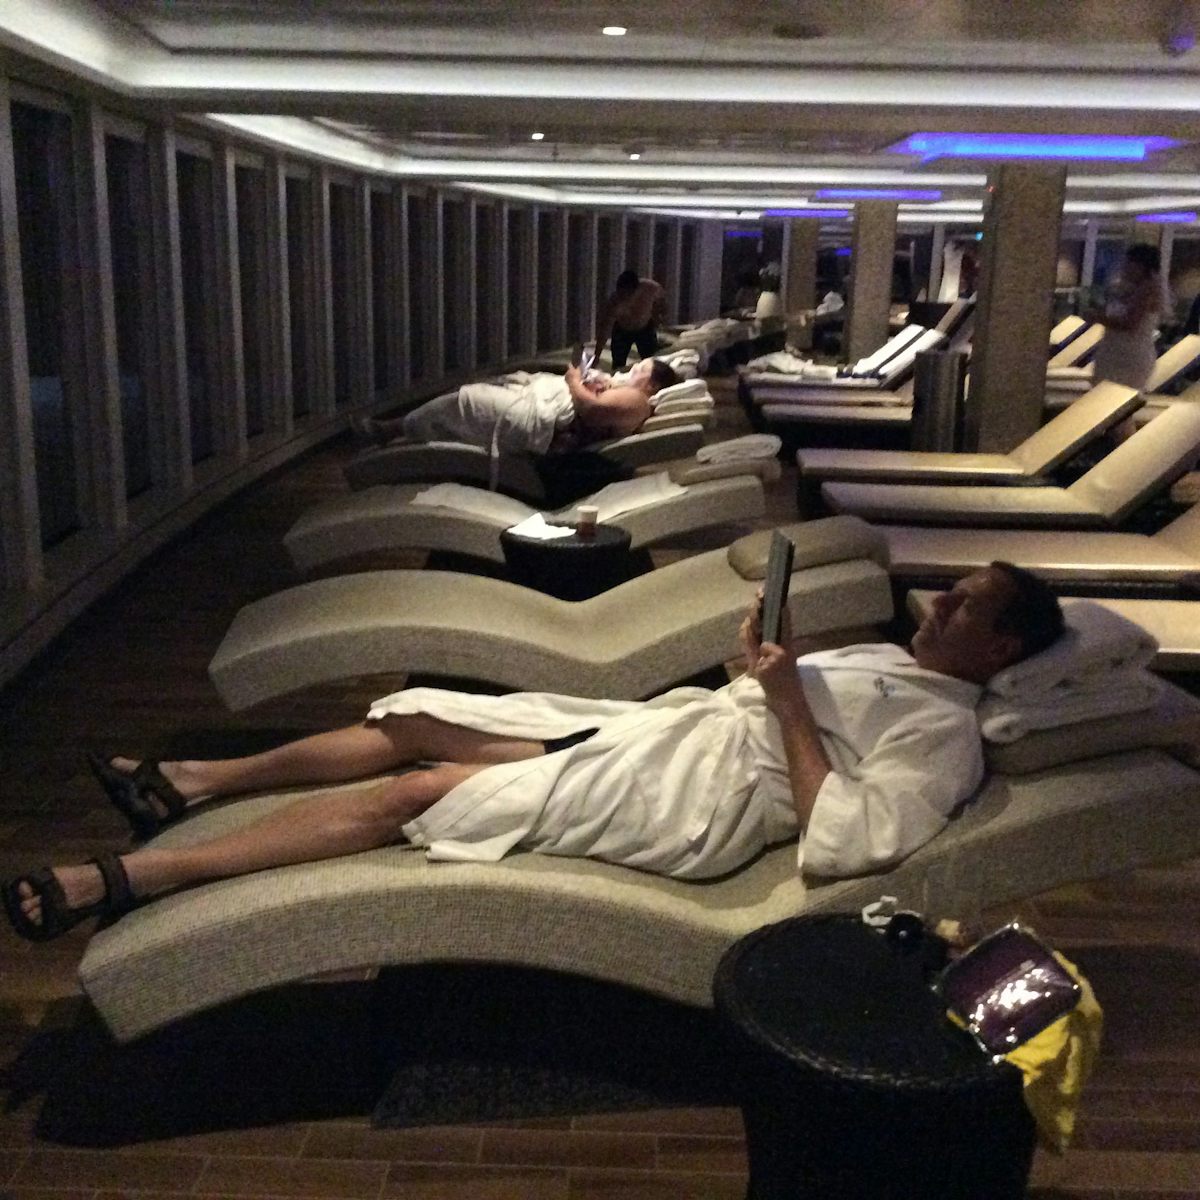 Relaxing on hot beds in the thermal suite